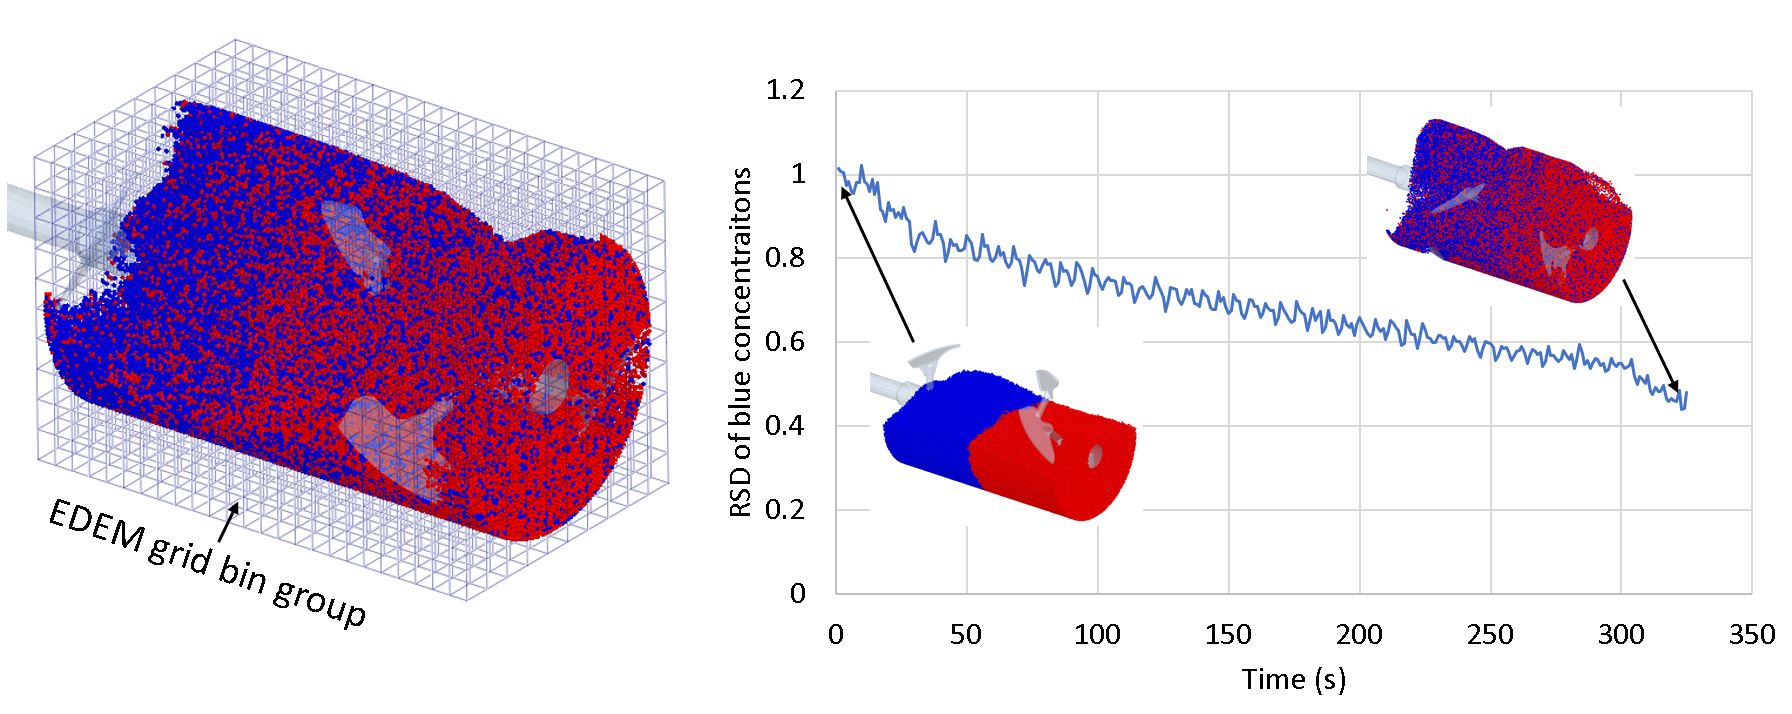 An EDEM grid bin group in a paddle mixer and the RSD evolution of the blue particle concentrations within the bins